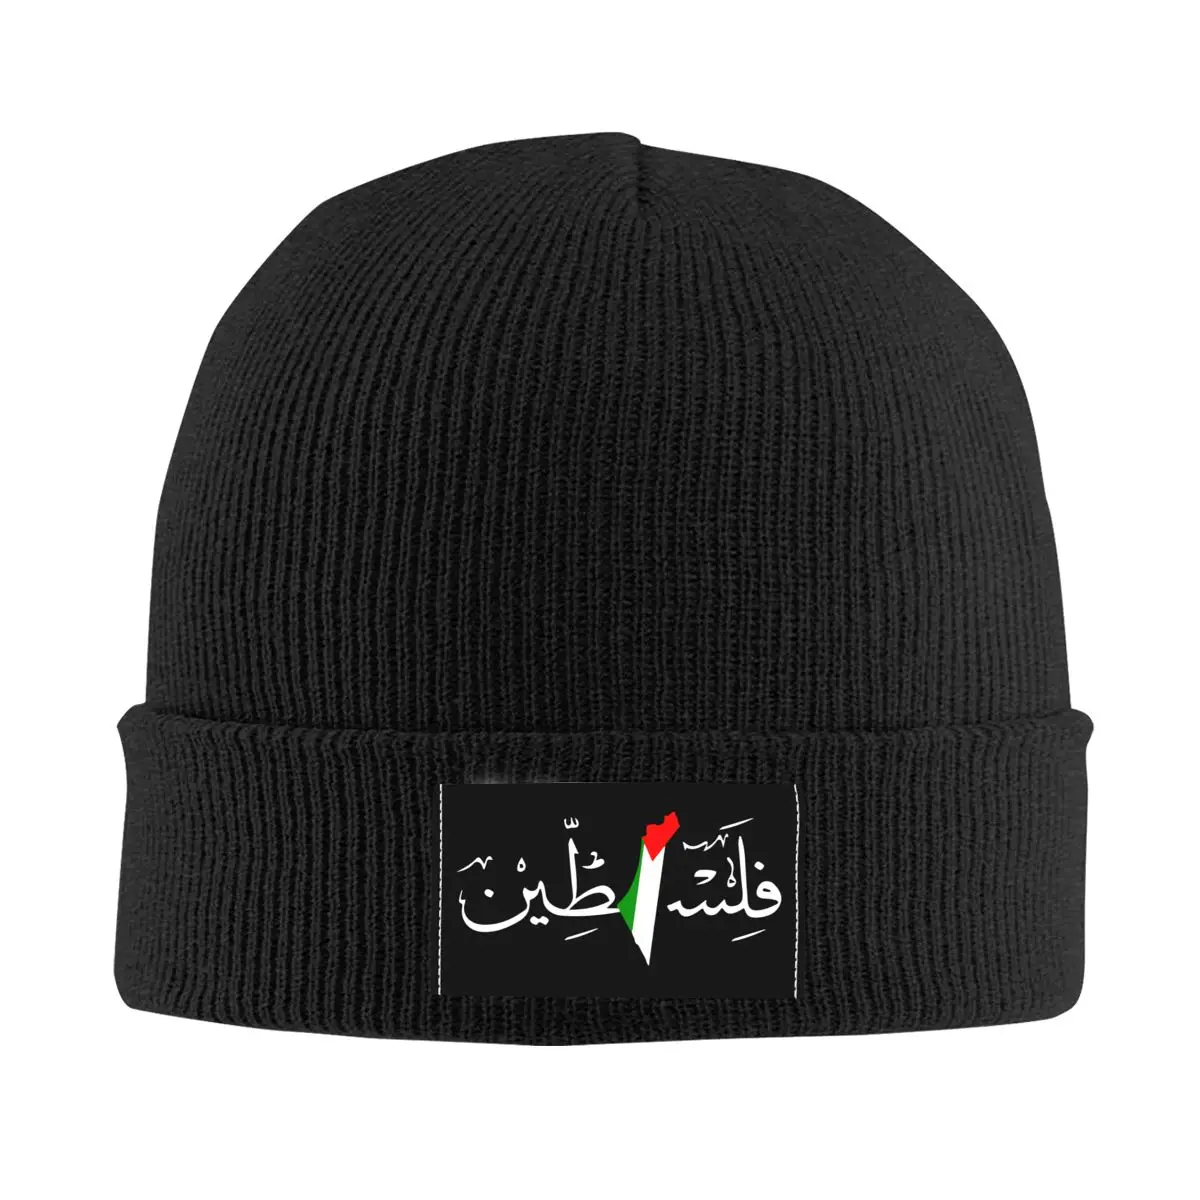 Palestine Arabic Calligraphy Name With Palestinian Flag Map Bonnet Hats Fashion Knitted Hat Warm Winter Skullies Beanies Caps 1